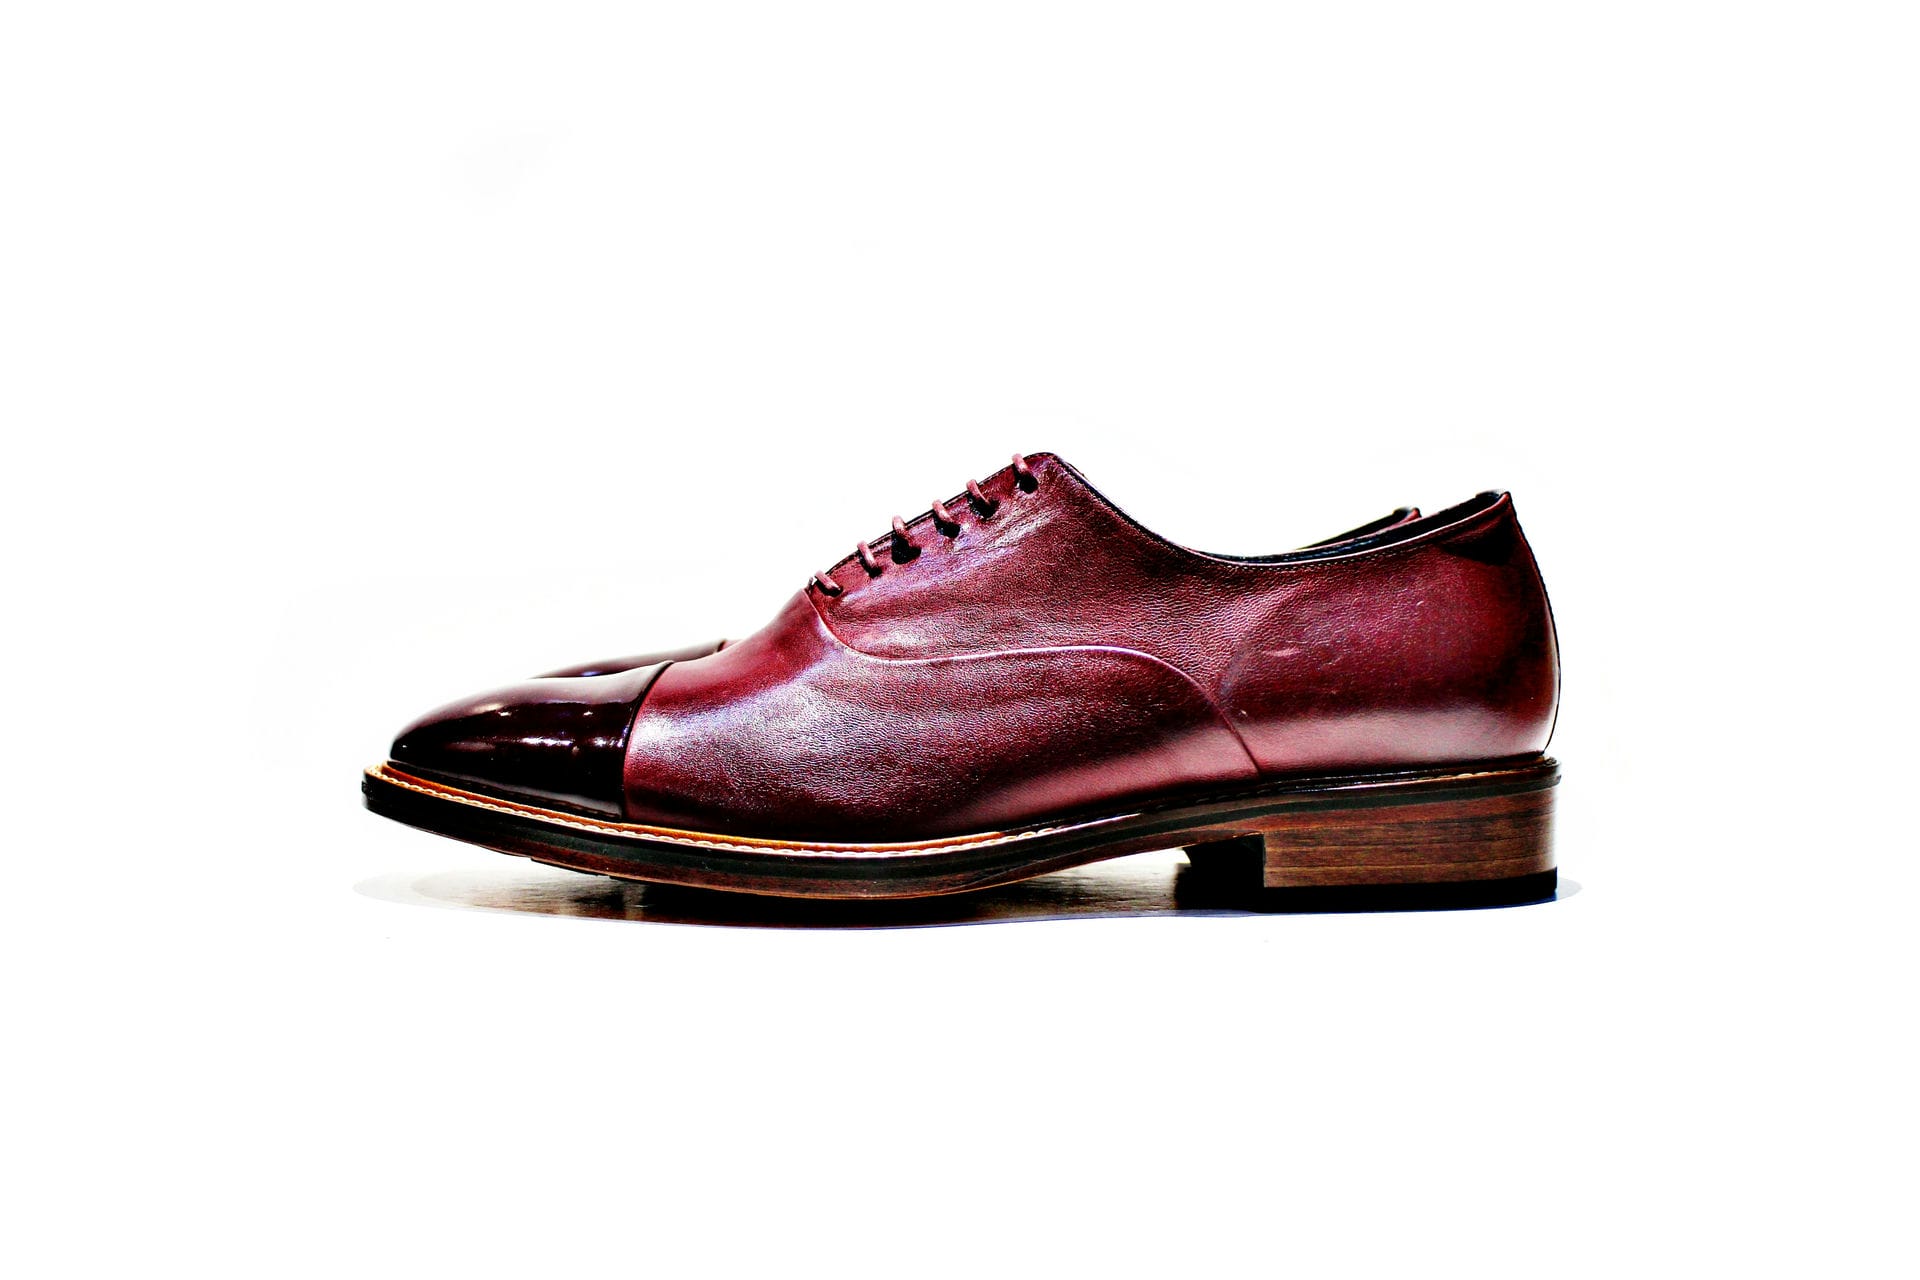 Shoe consisting of leather, varnish, leather lining, with leather sole. Handmade in Portugal. “Walk with pintta